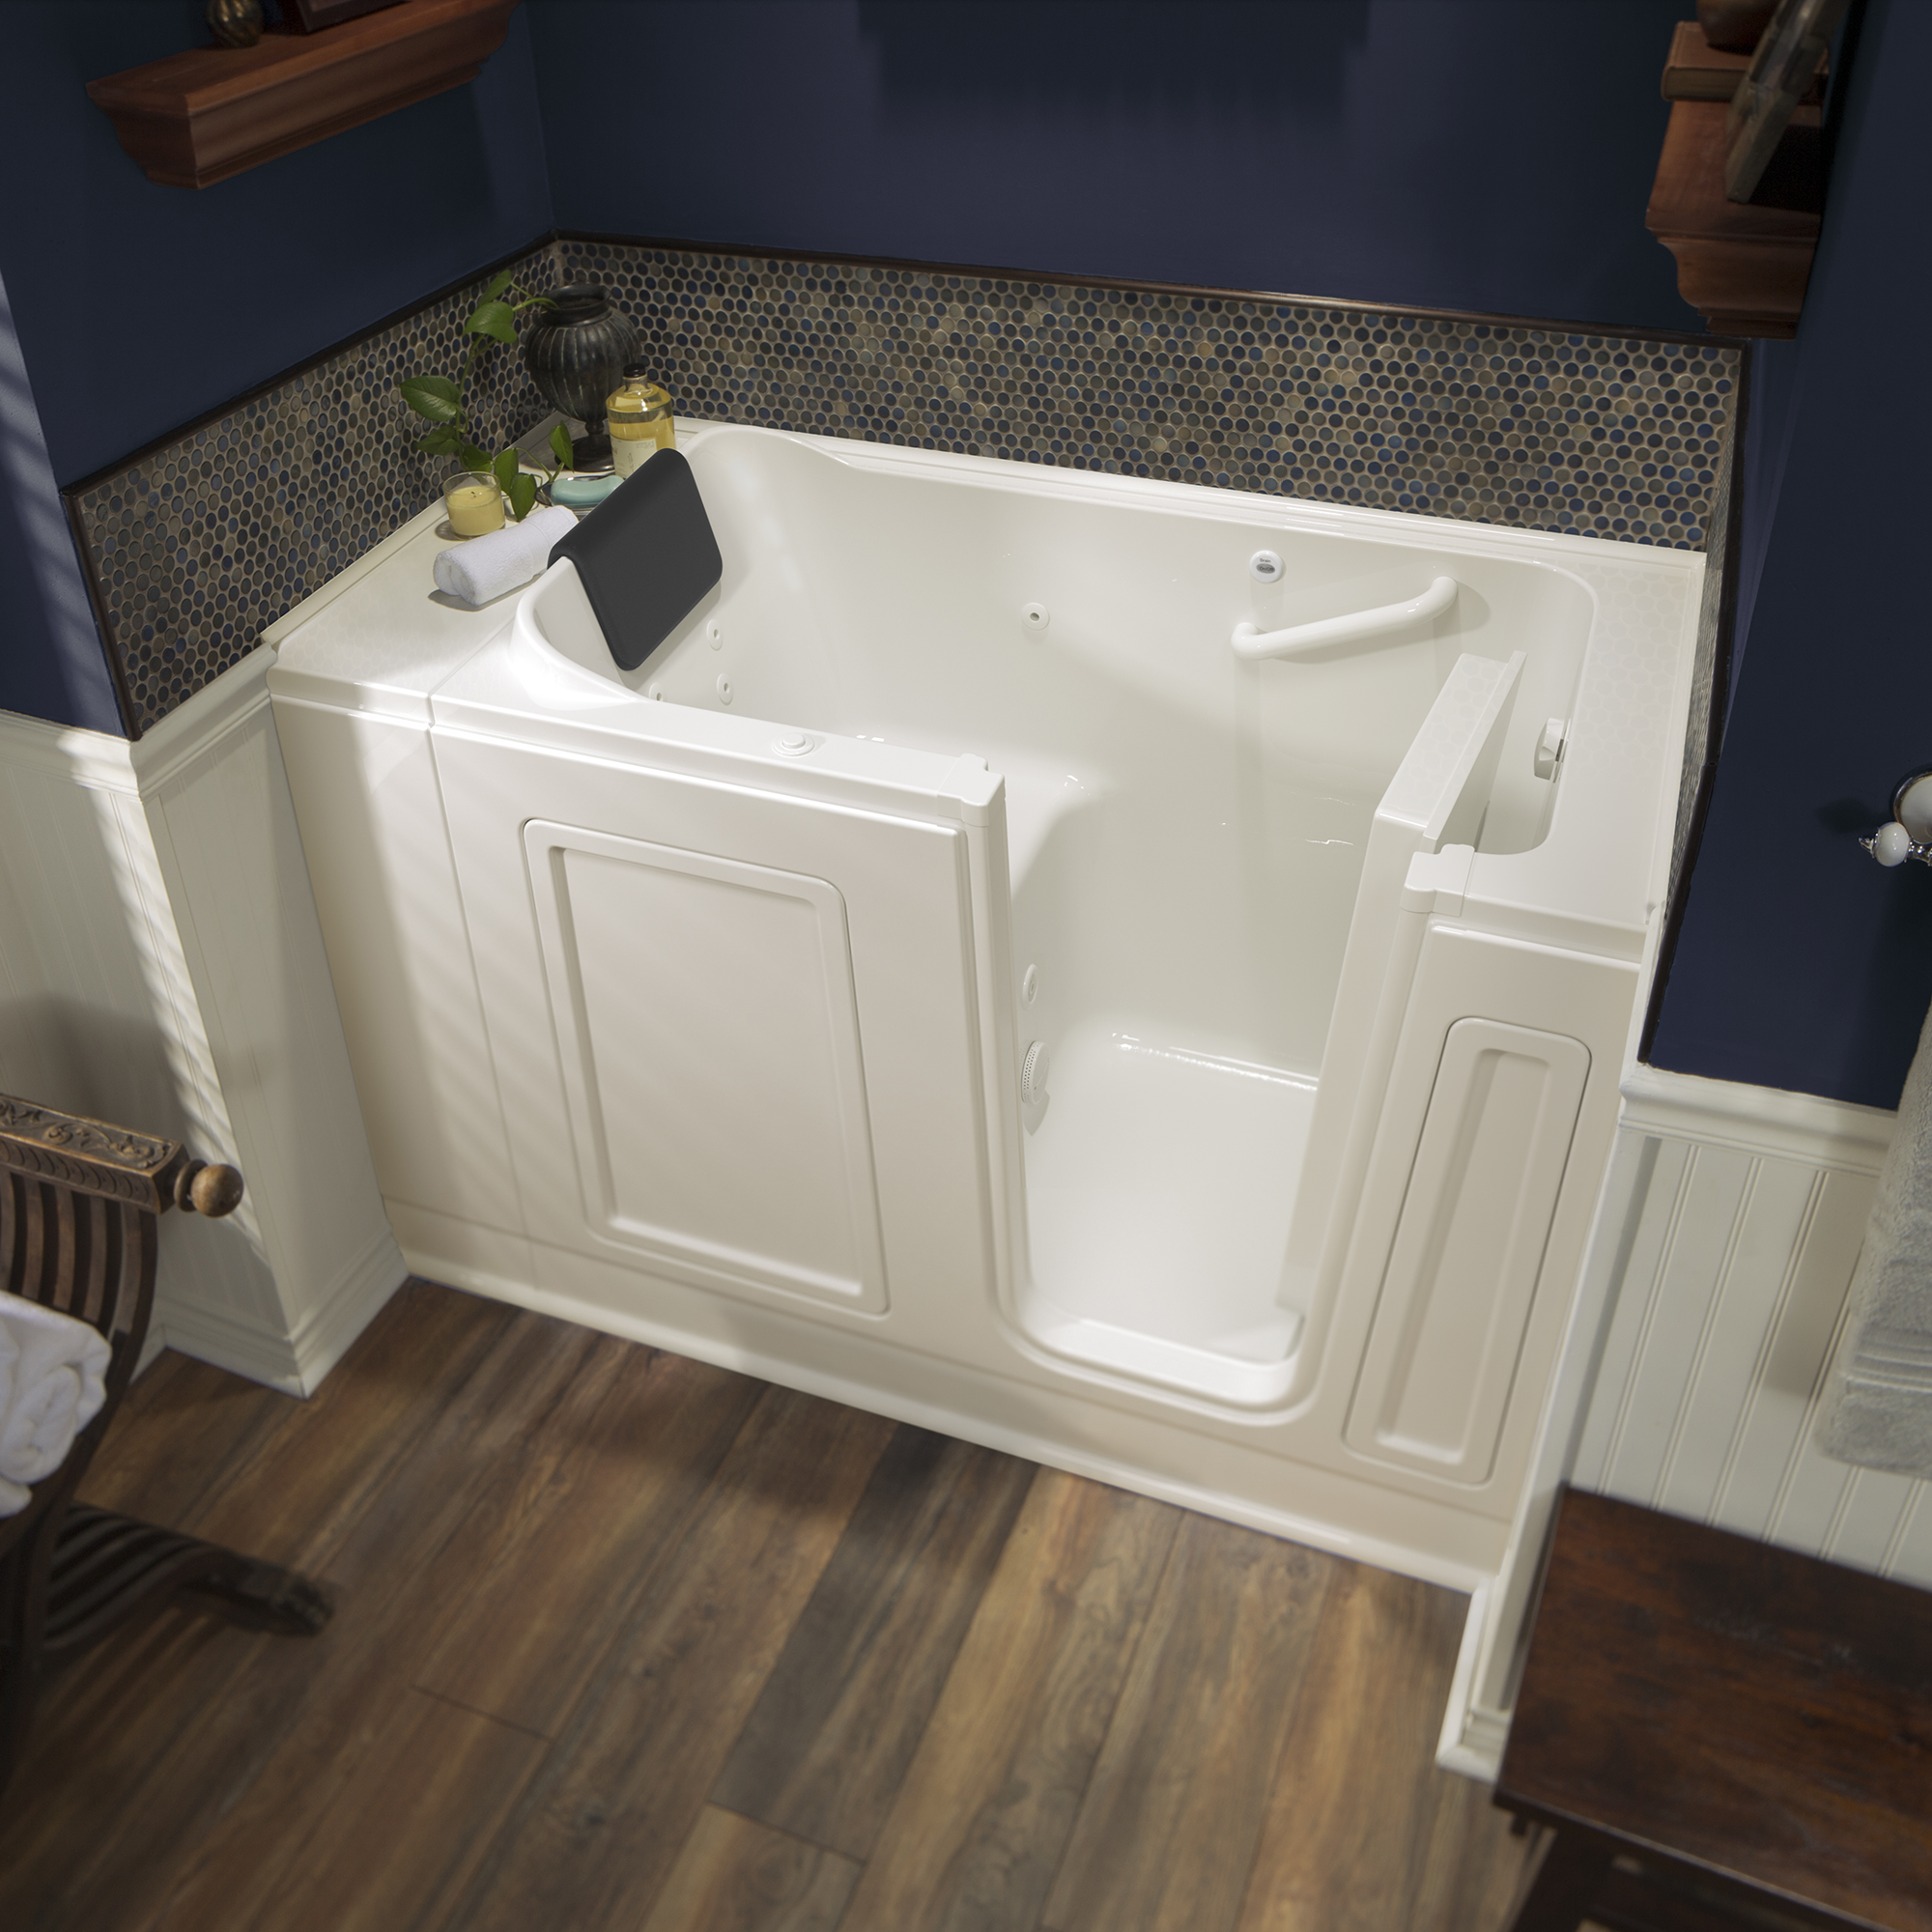 Acrylic Luxury Series 30 x 51 -Inch Walk-in Tub With Whirlpool System - Right-Hand Drain